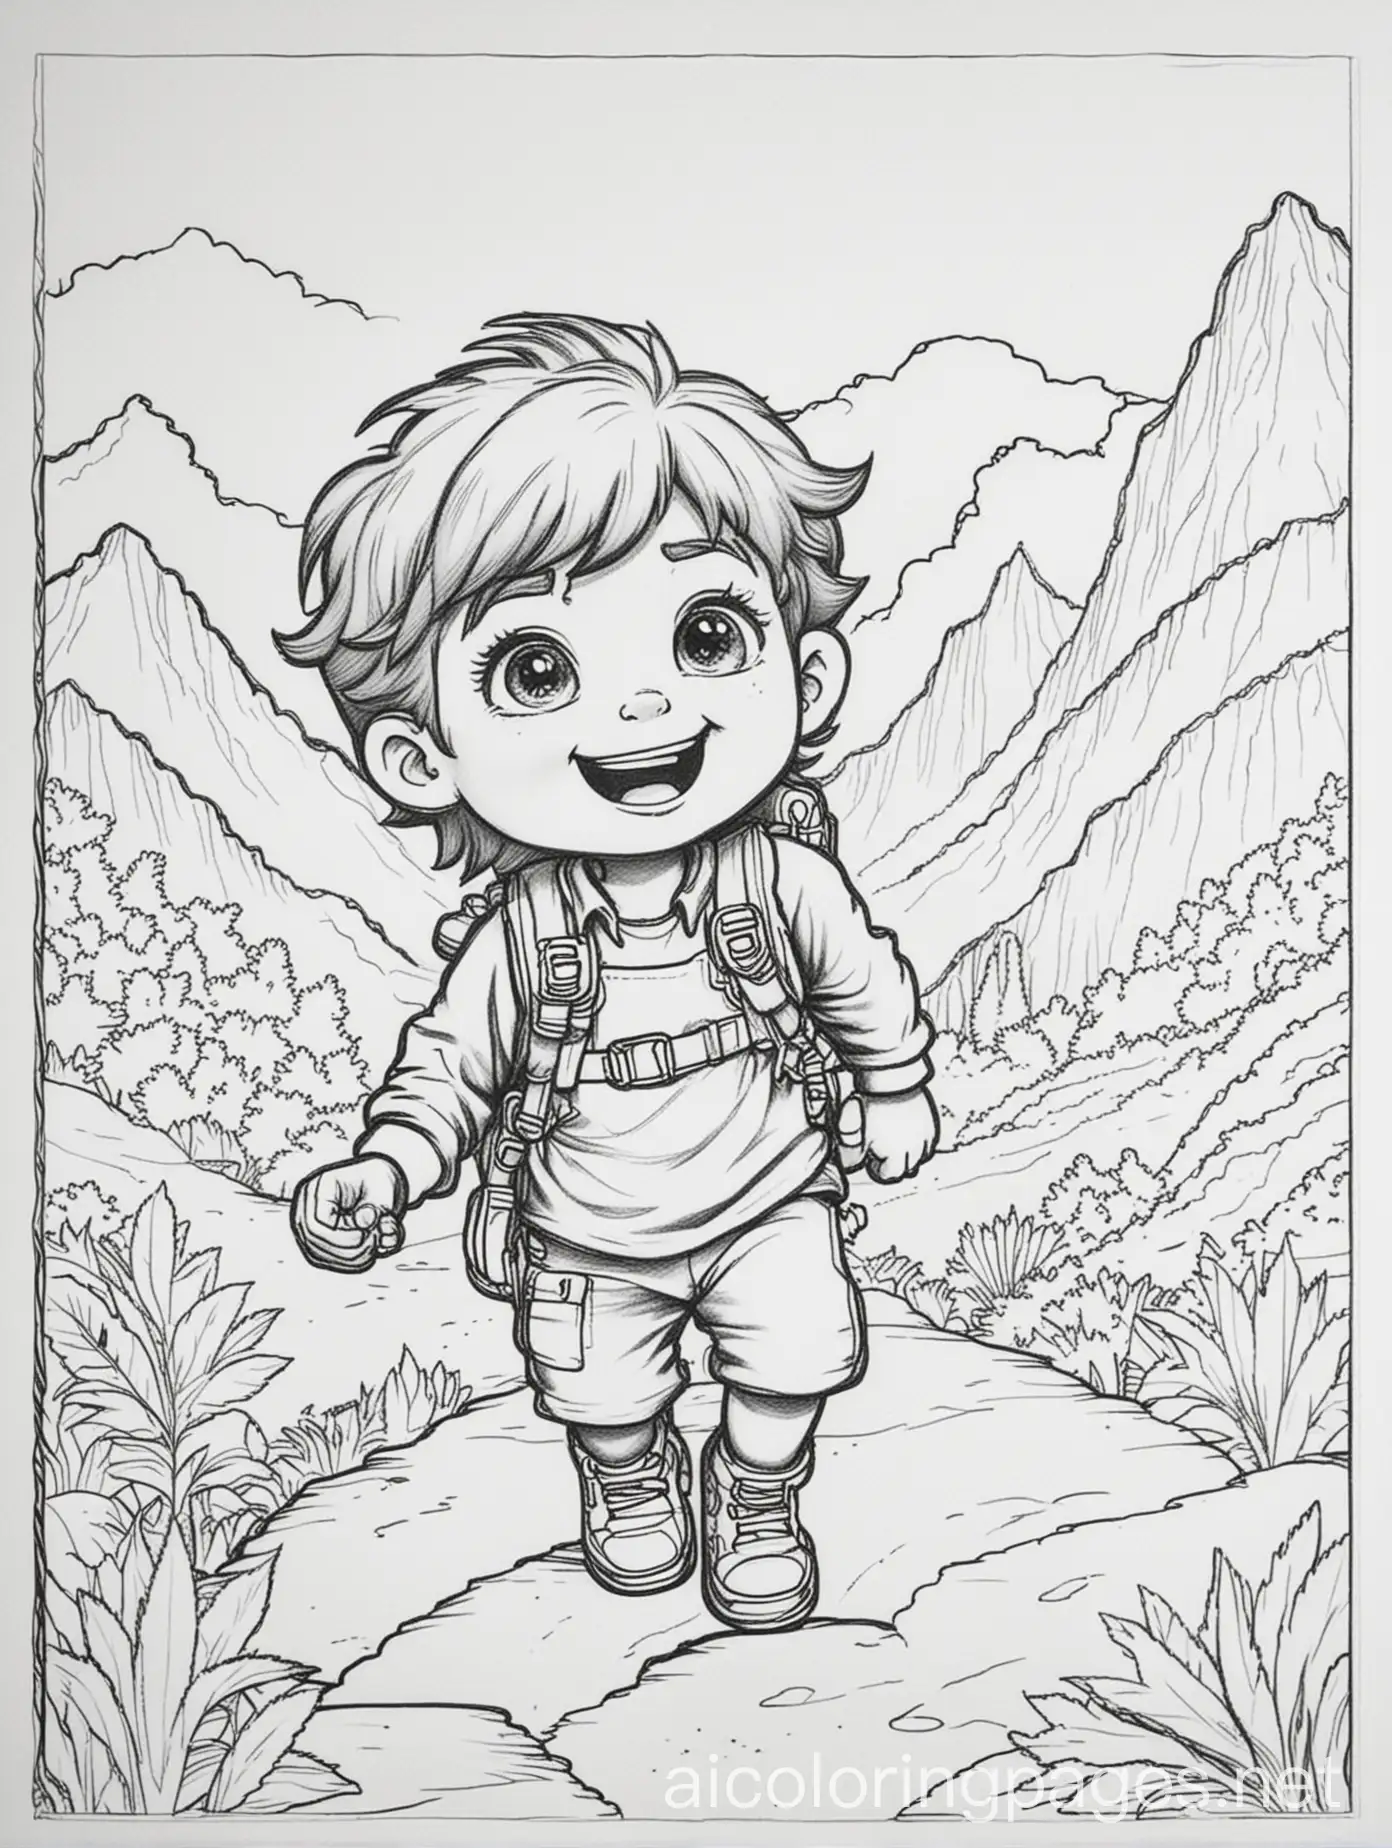 Kid's Fun. Adventure, Coloring Page, black and white, line art, white background, Simplicity, Ample White Space. The background of the coloring page is plain white to make it easy for young children to color within the lines. The outlines of all the subjects are easy to distinguish, making it simple for kids to color without too much difficulty